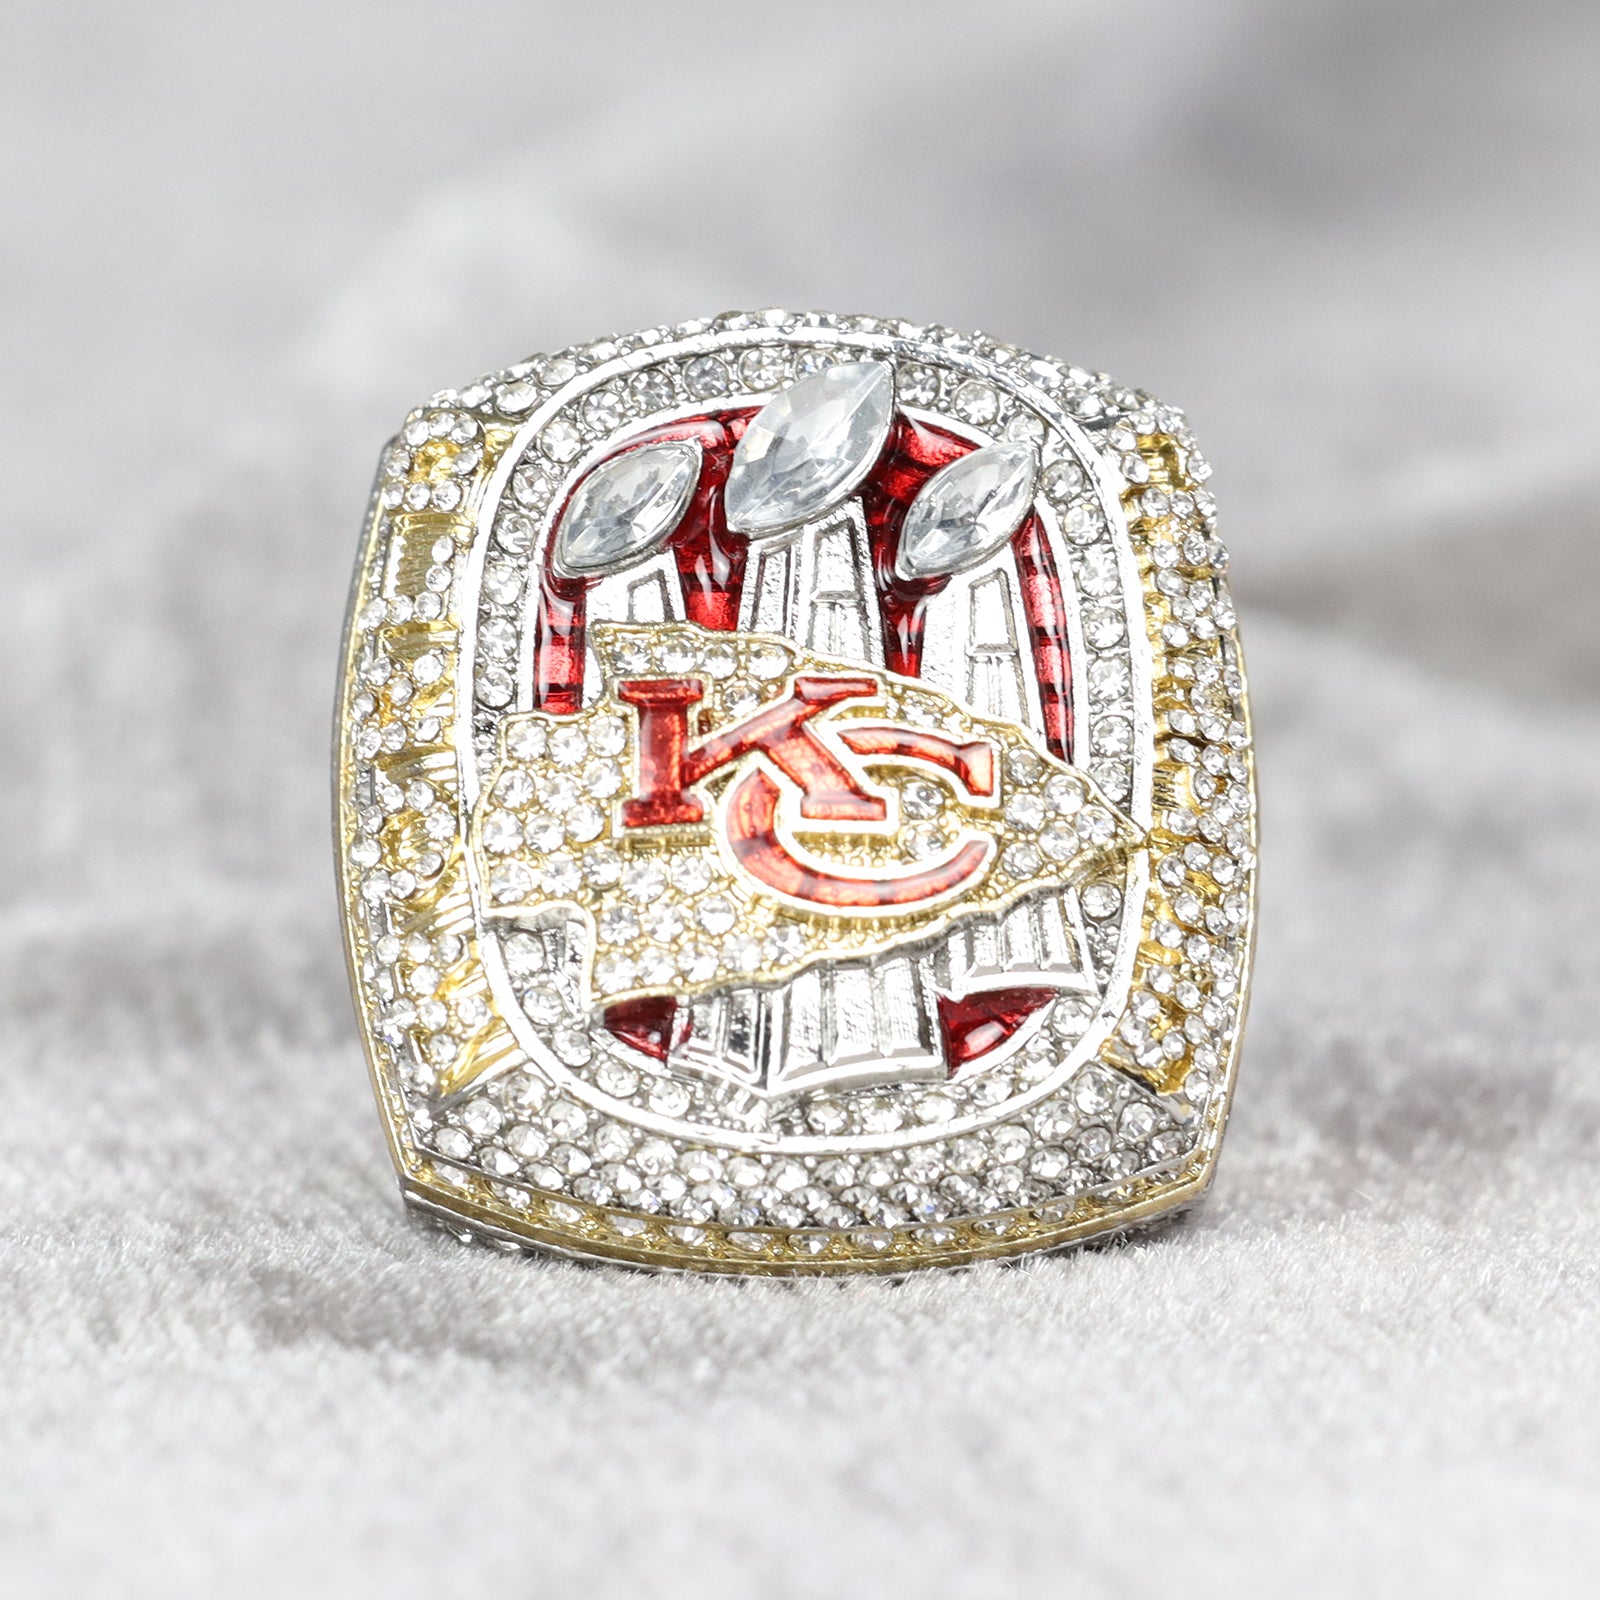 Chiefs Super Bowl LVII ring: first look at the jewelry - Arrowhead Pride